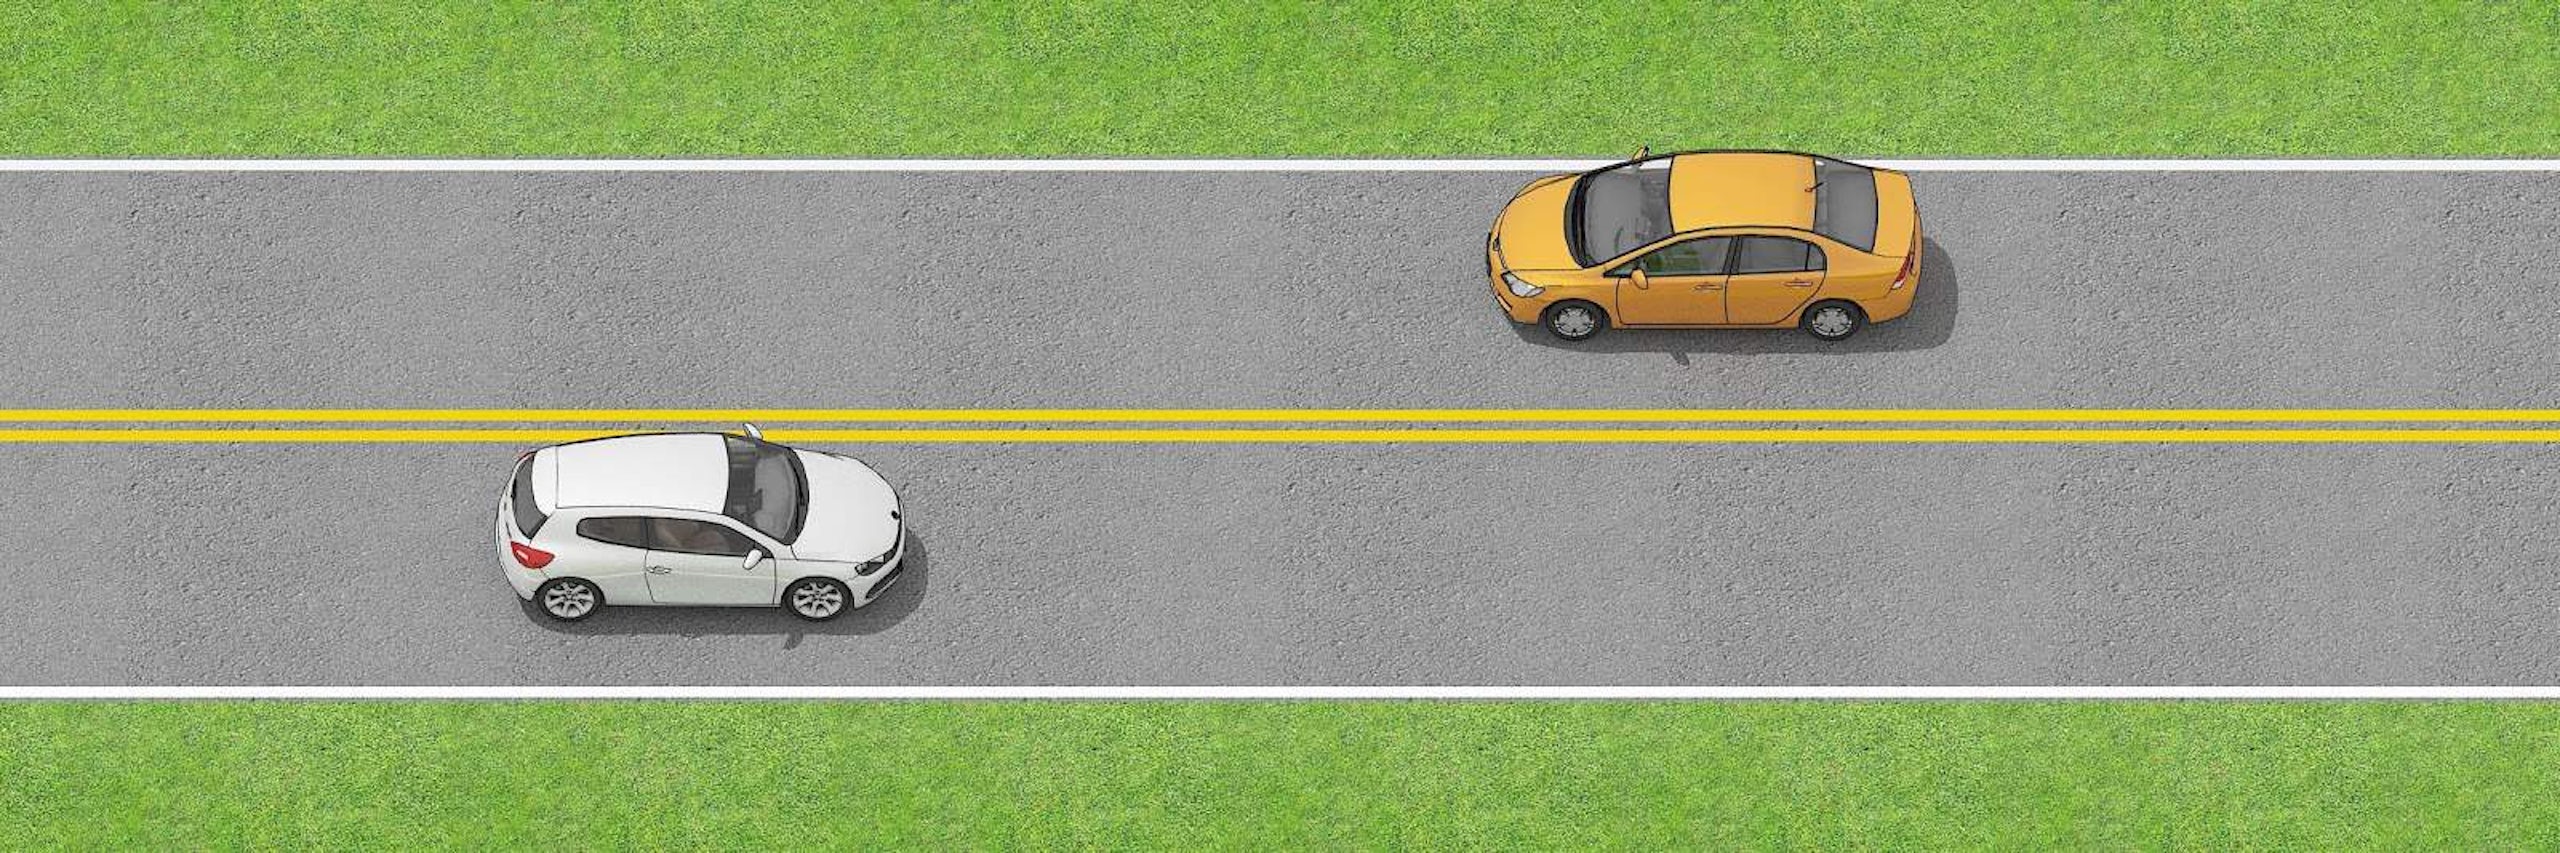 Two vehicles separated by double solid yellow lines